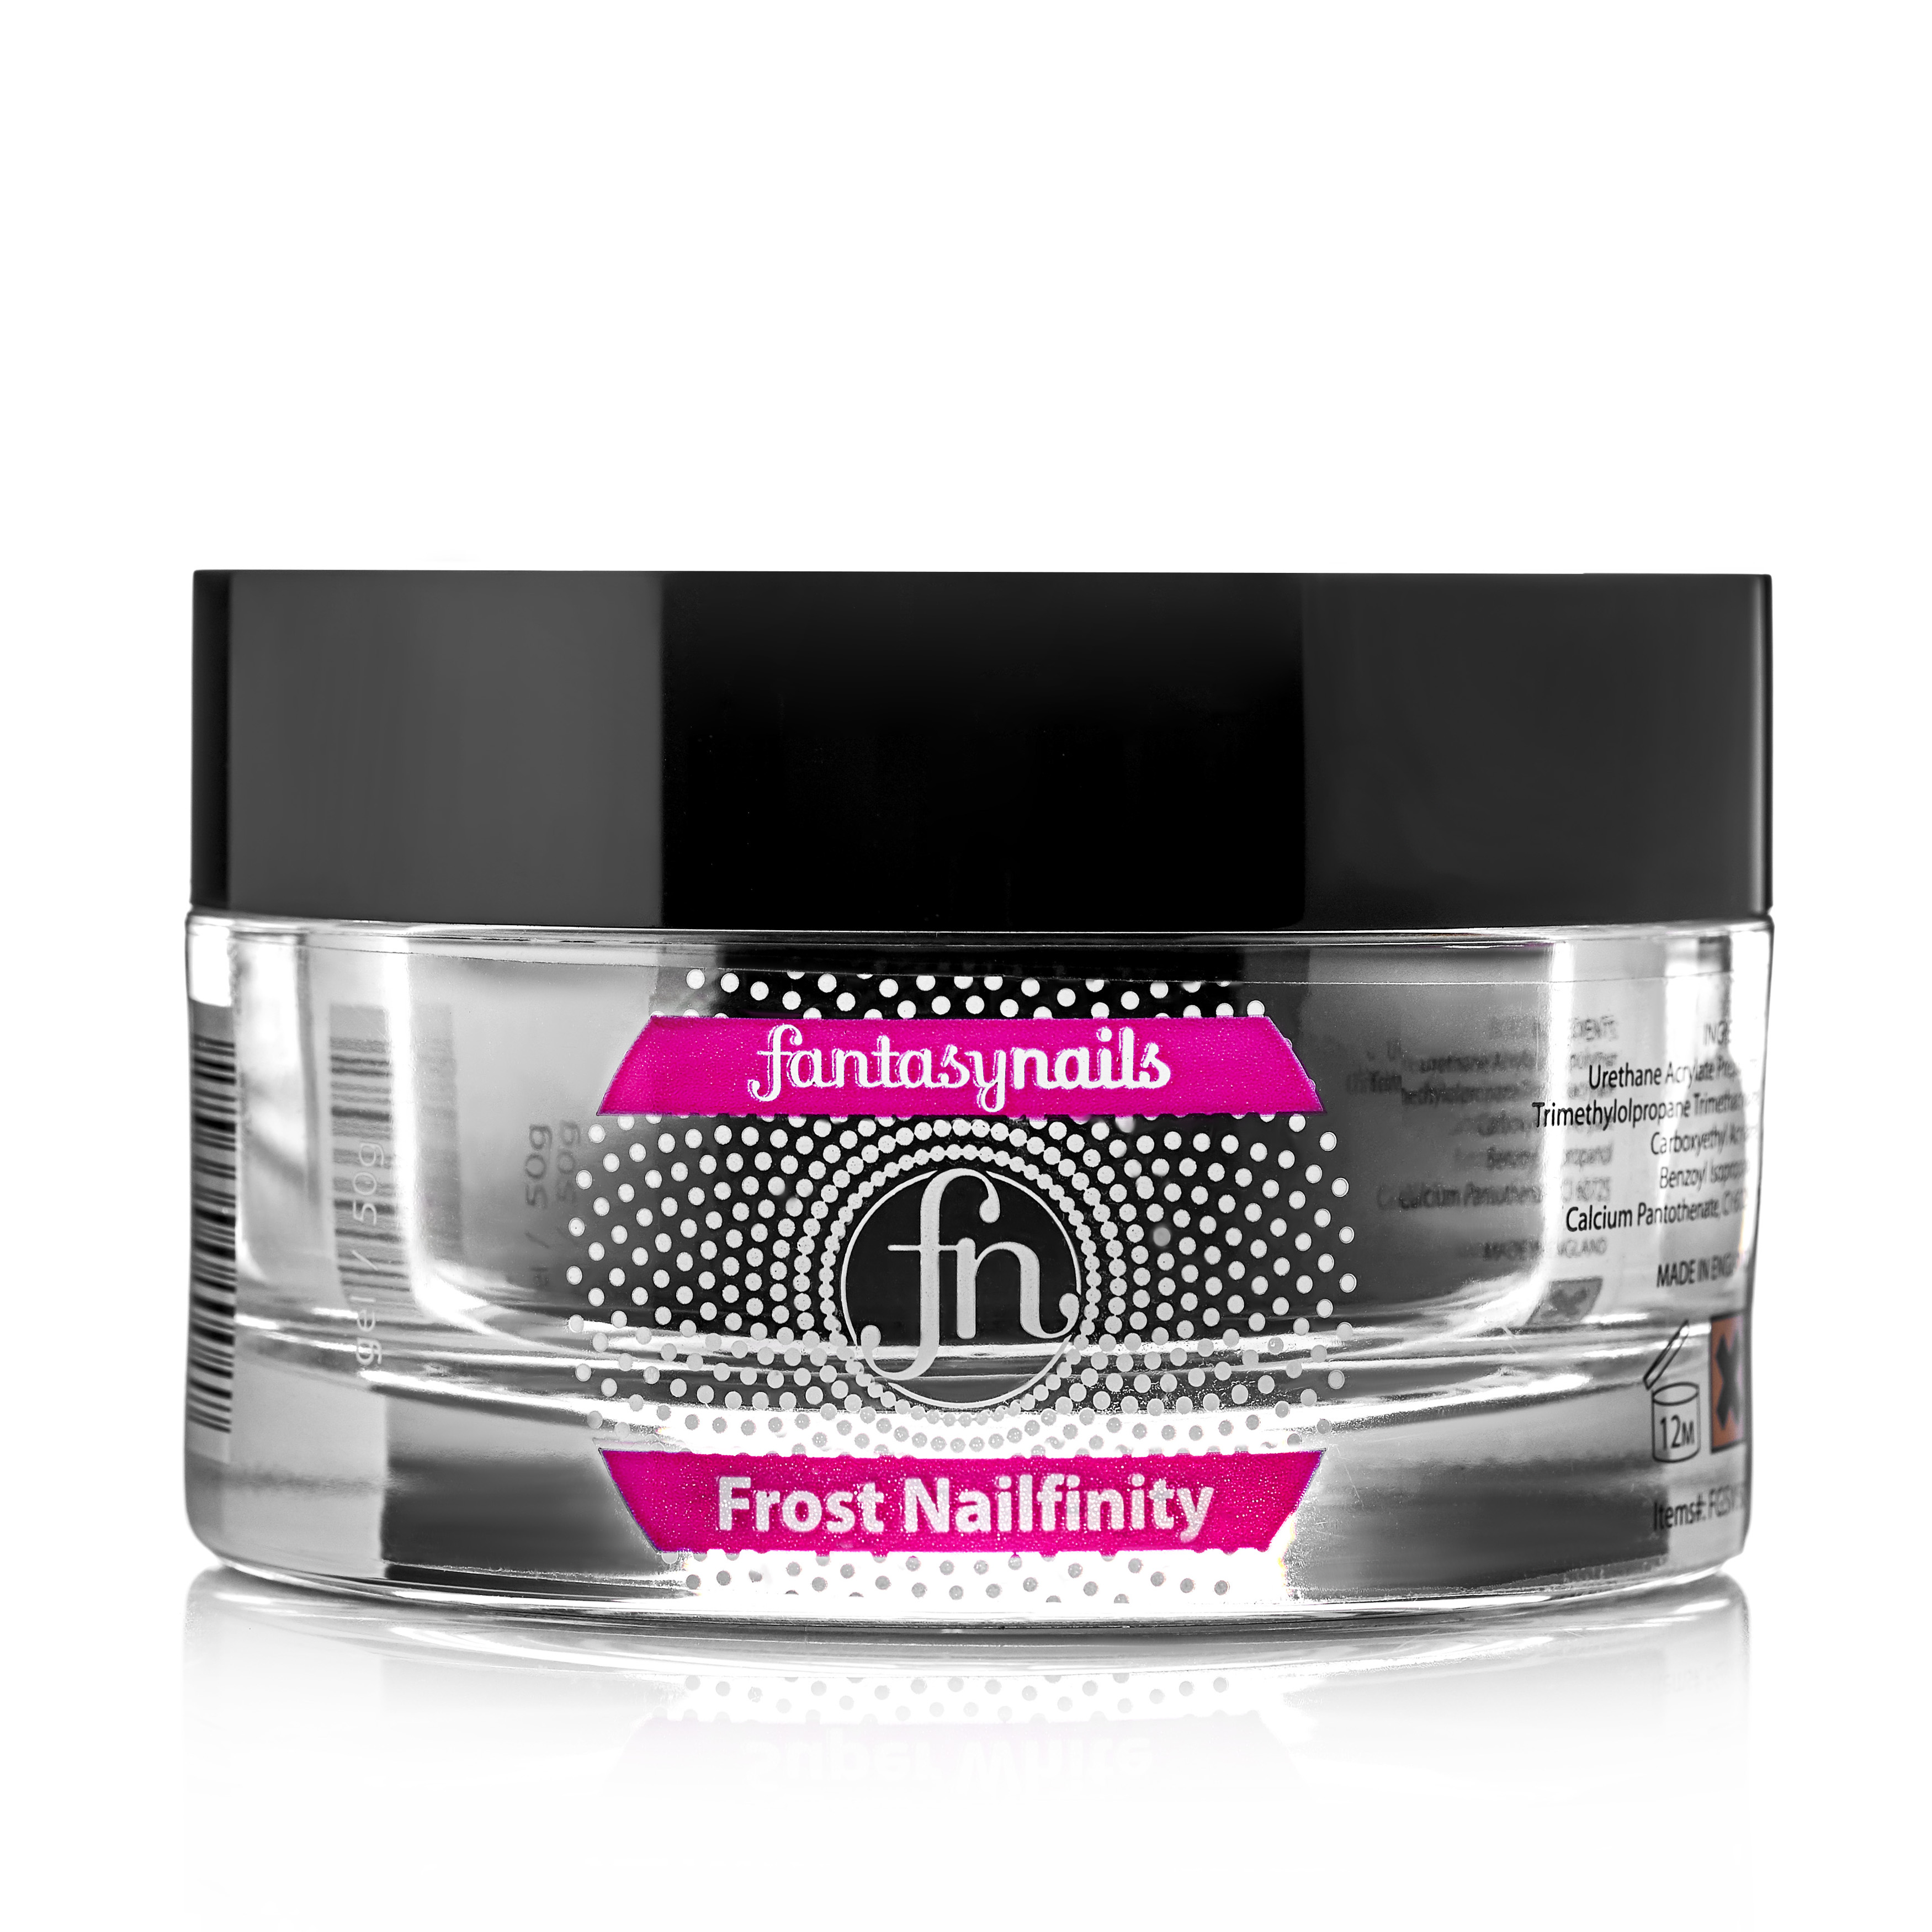 Gel Fantasy Nails Frost Nailfinity cold camouflage (50 ml)